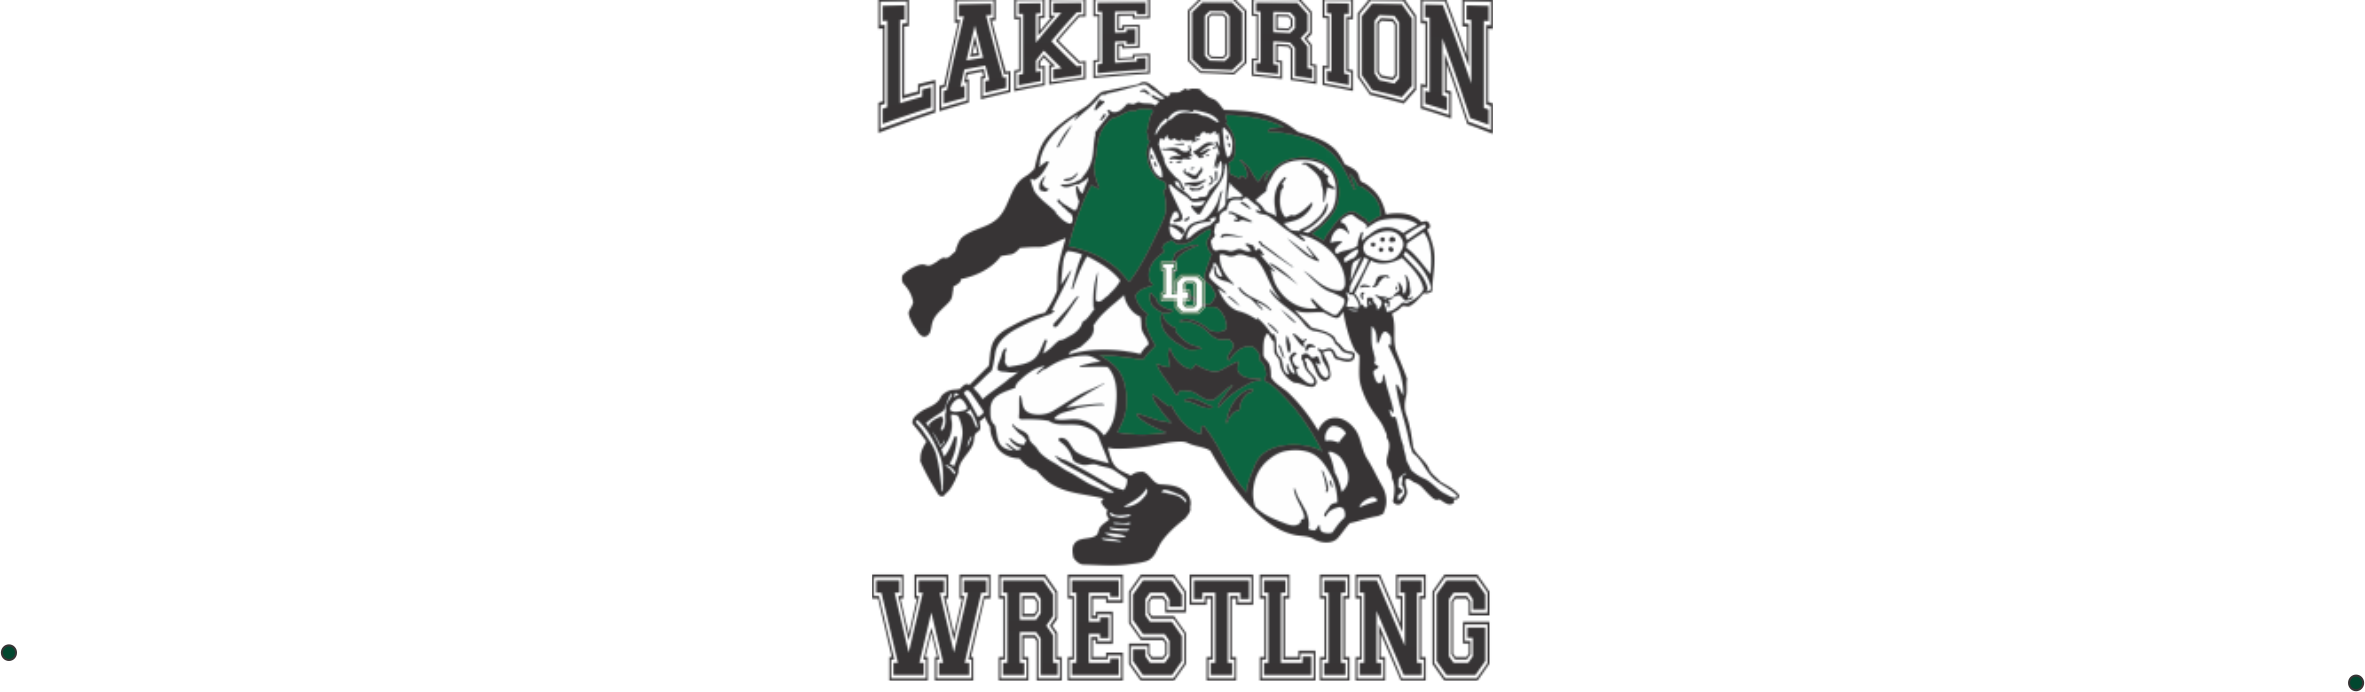 images/Lake Orion Wrestling Middle.gif